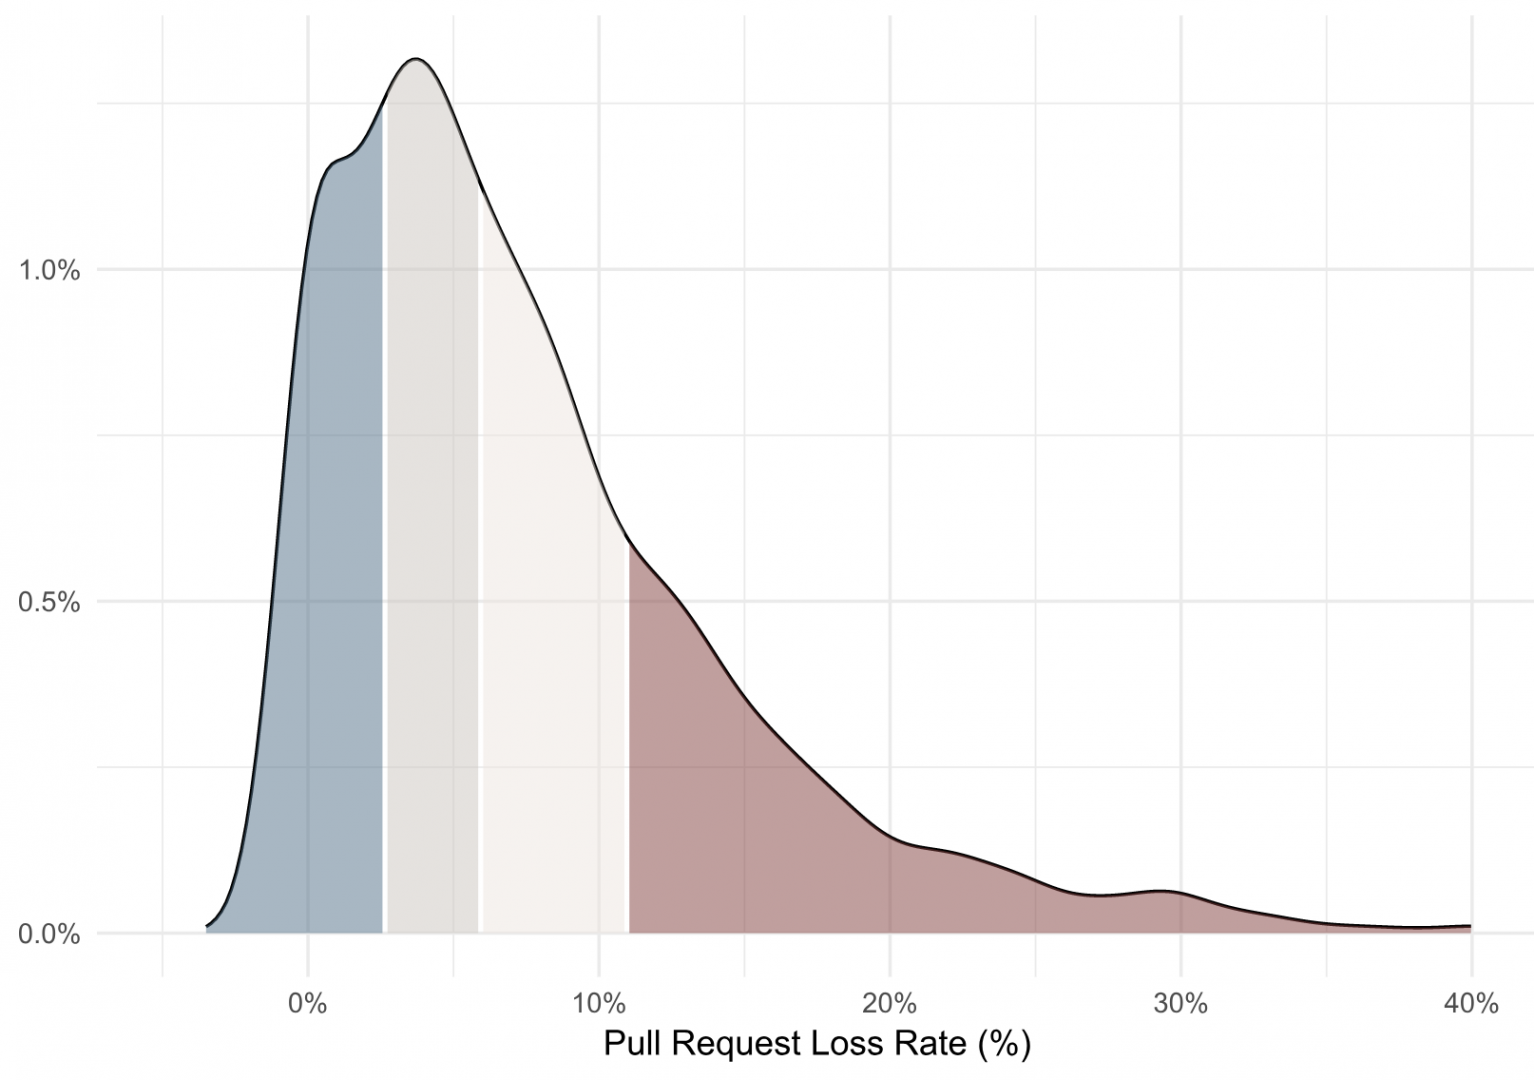 Pull Request Loss Rate